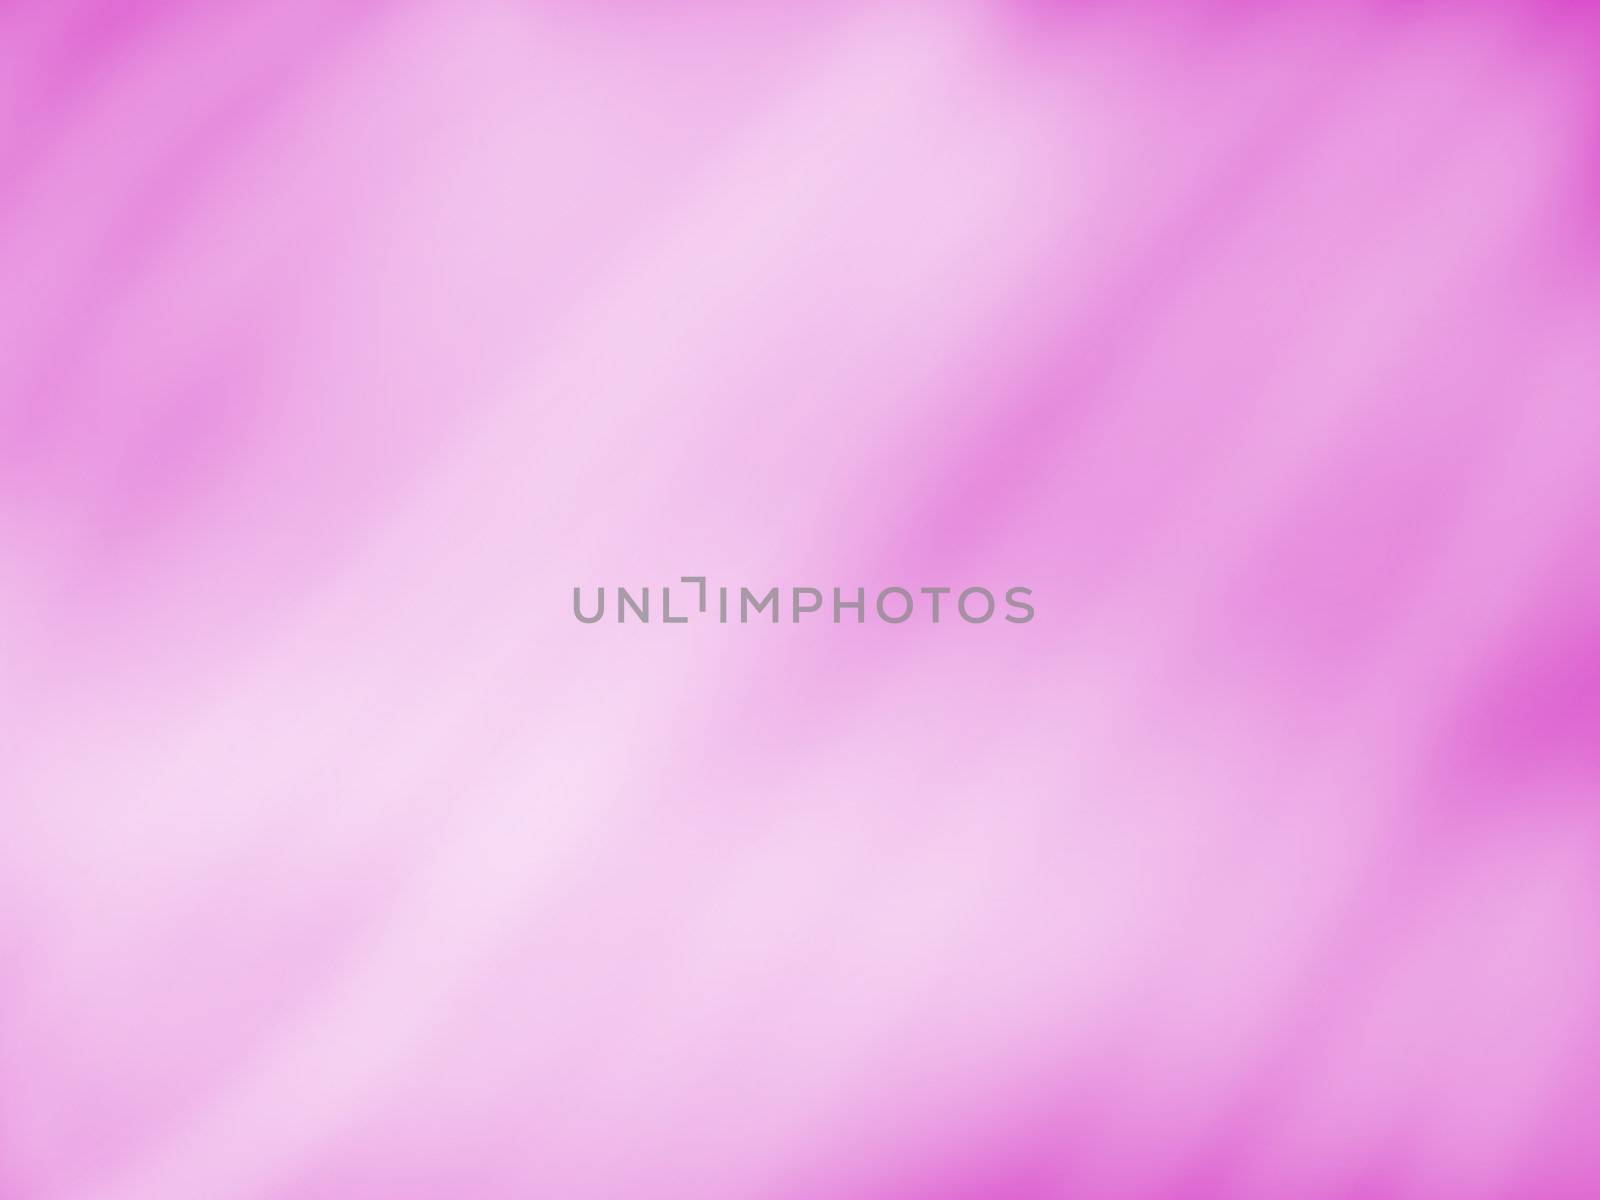 Soft light or airy pink abstract background